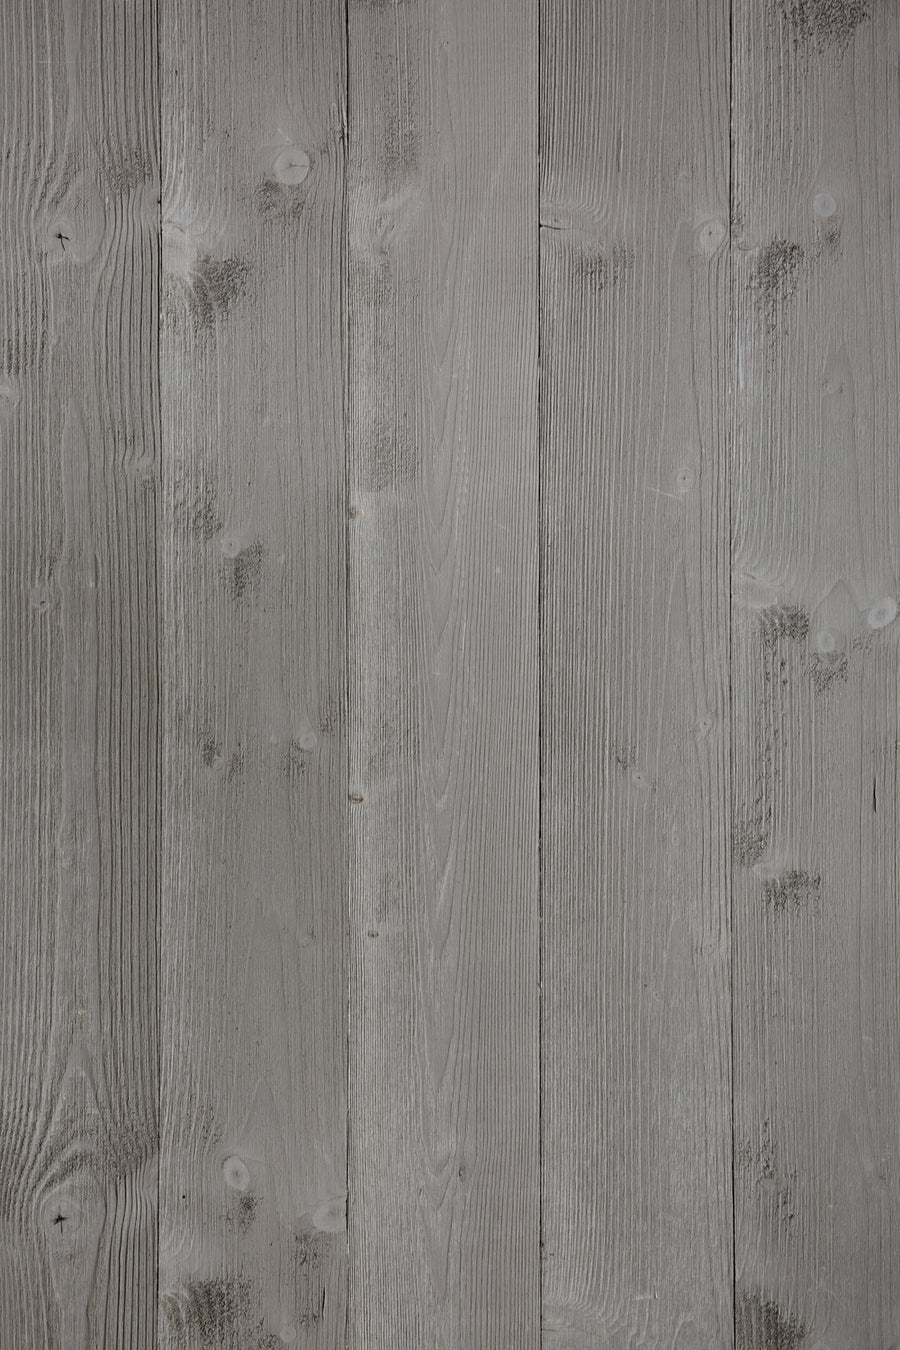 Rustic gray wood photography surface